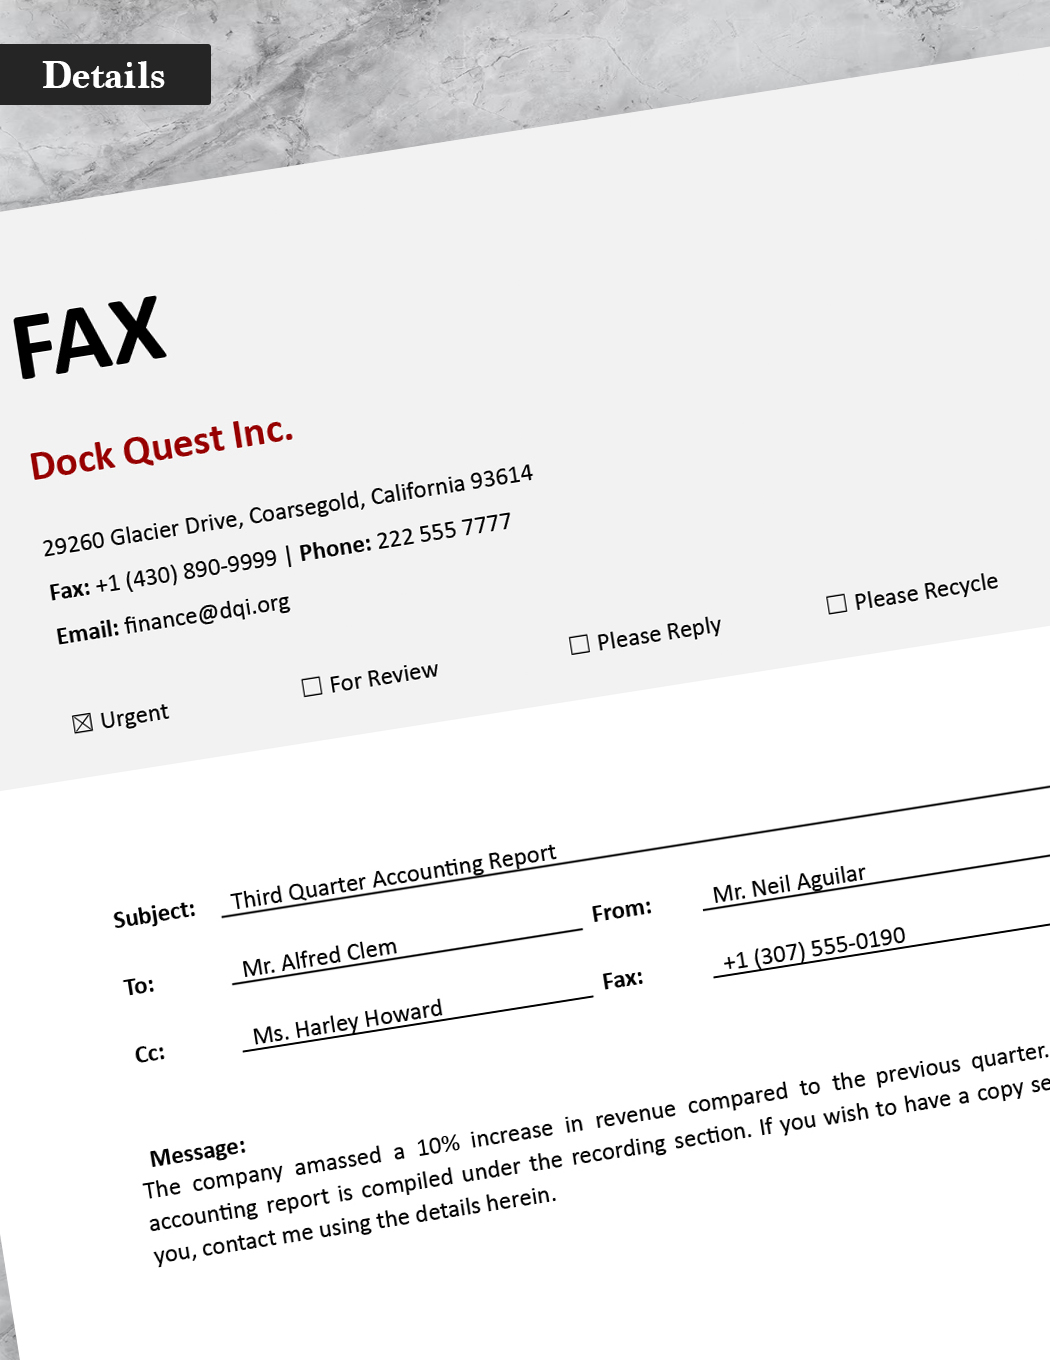 Accounting Fax Cover Sheet Template